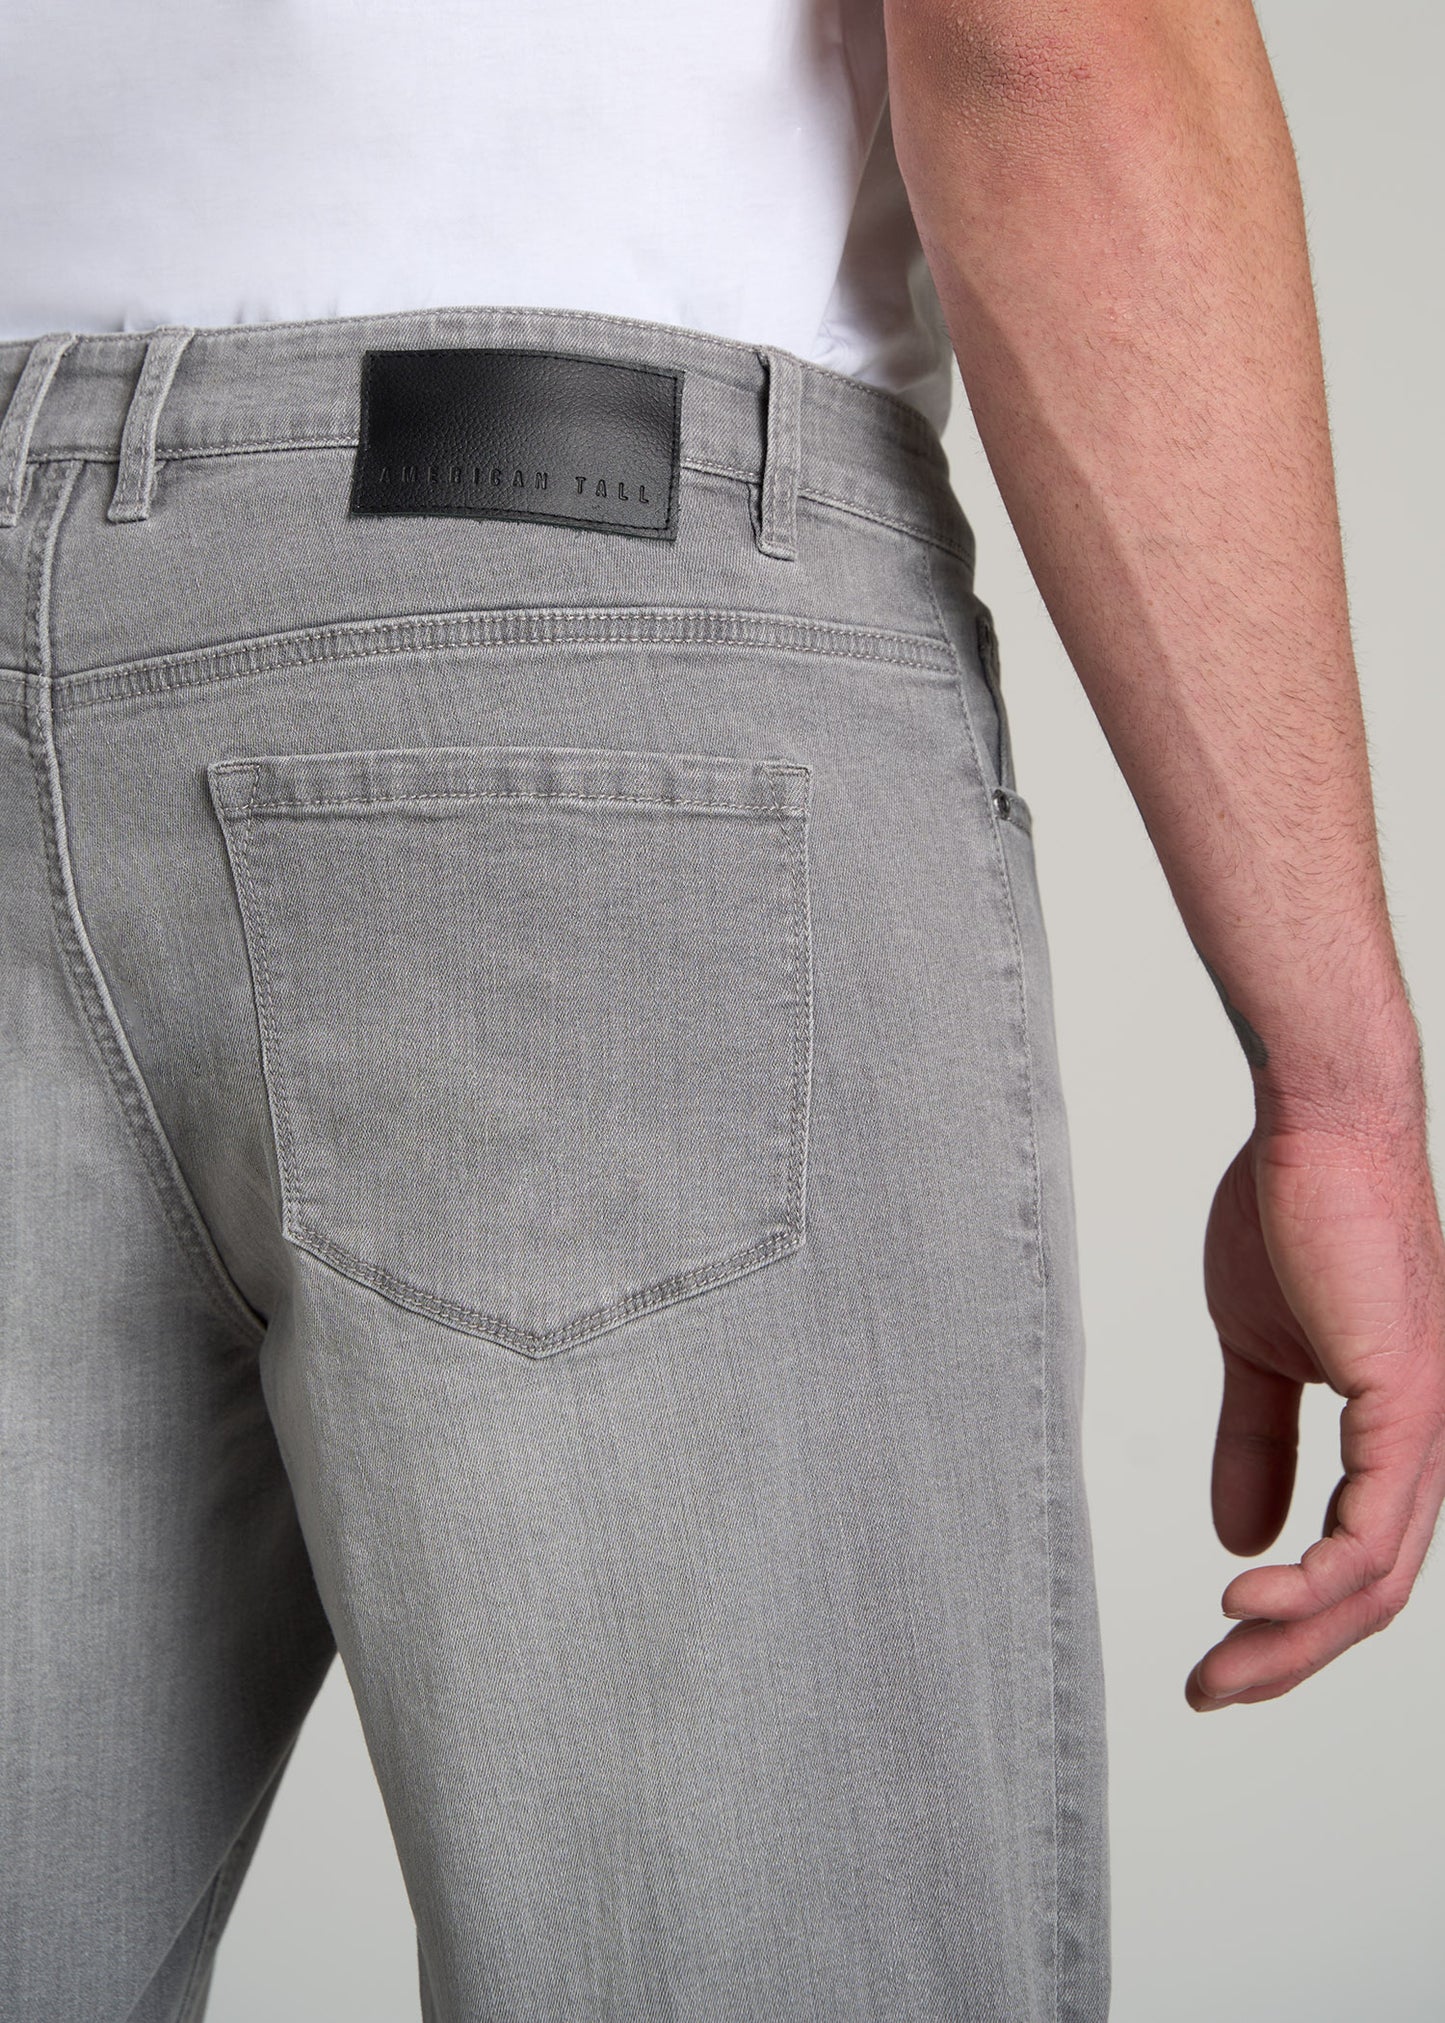     American-Tall-Men-Carman-Tapered-Fit-Jeans-Concrete-Grey-detail